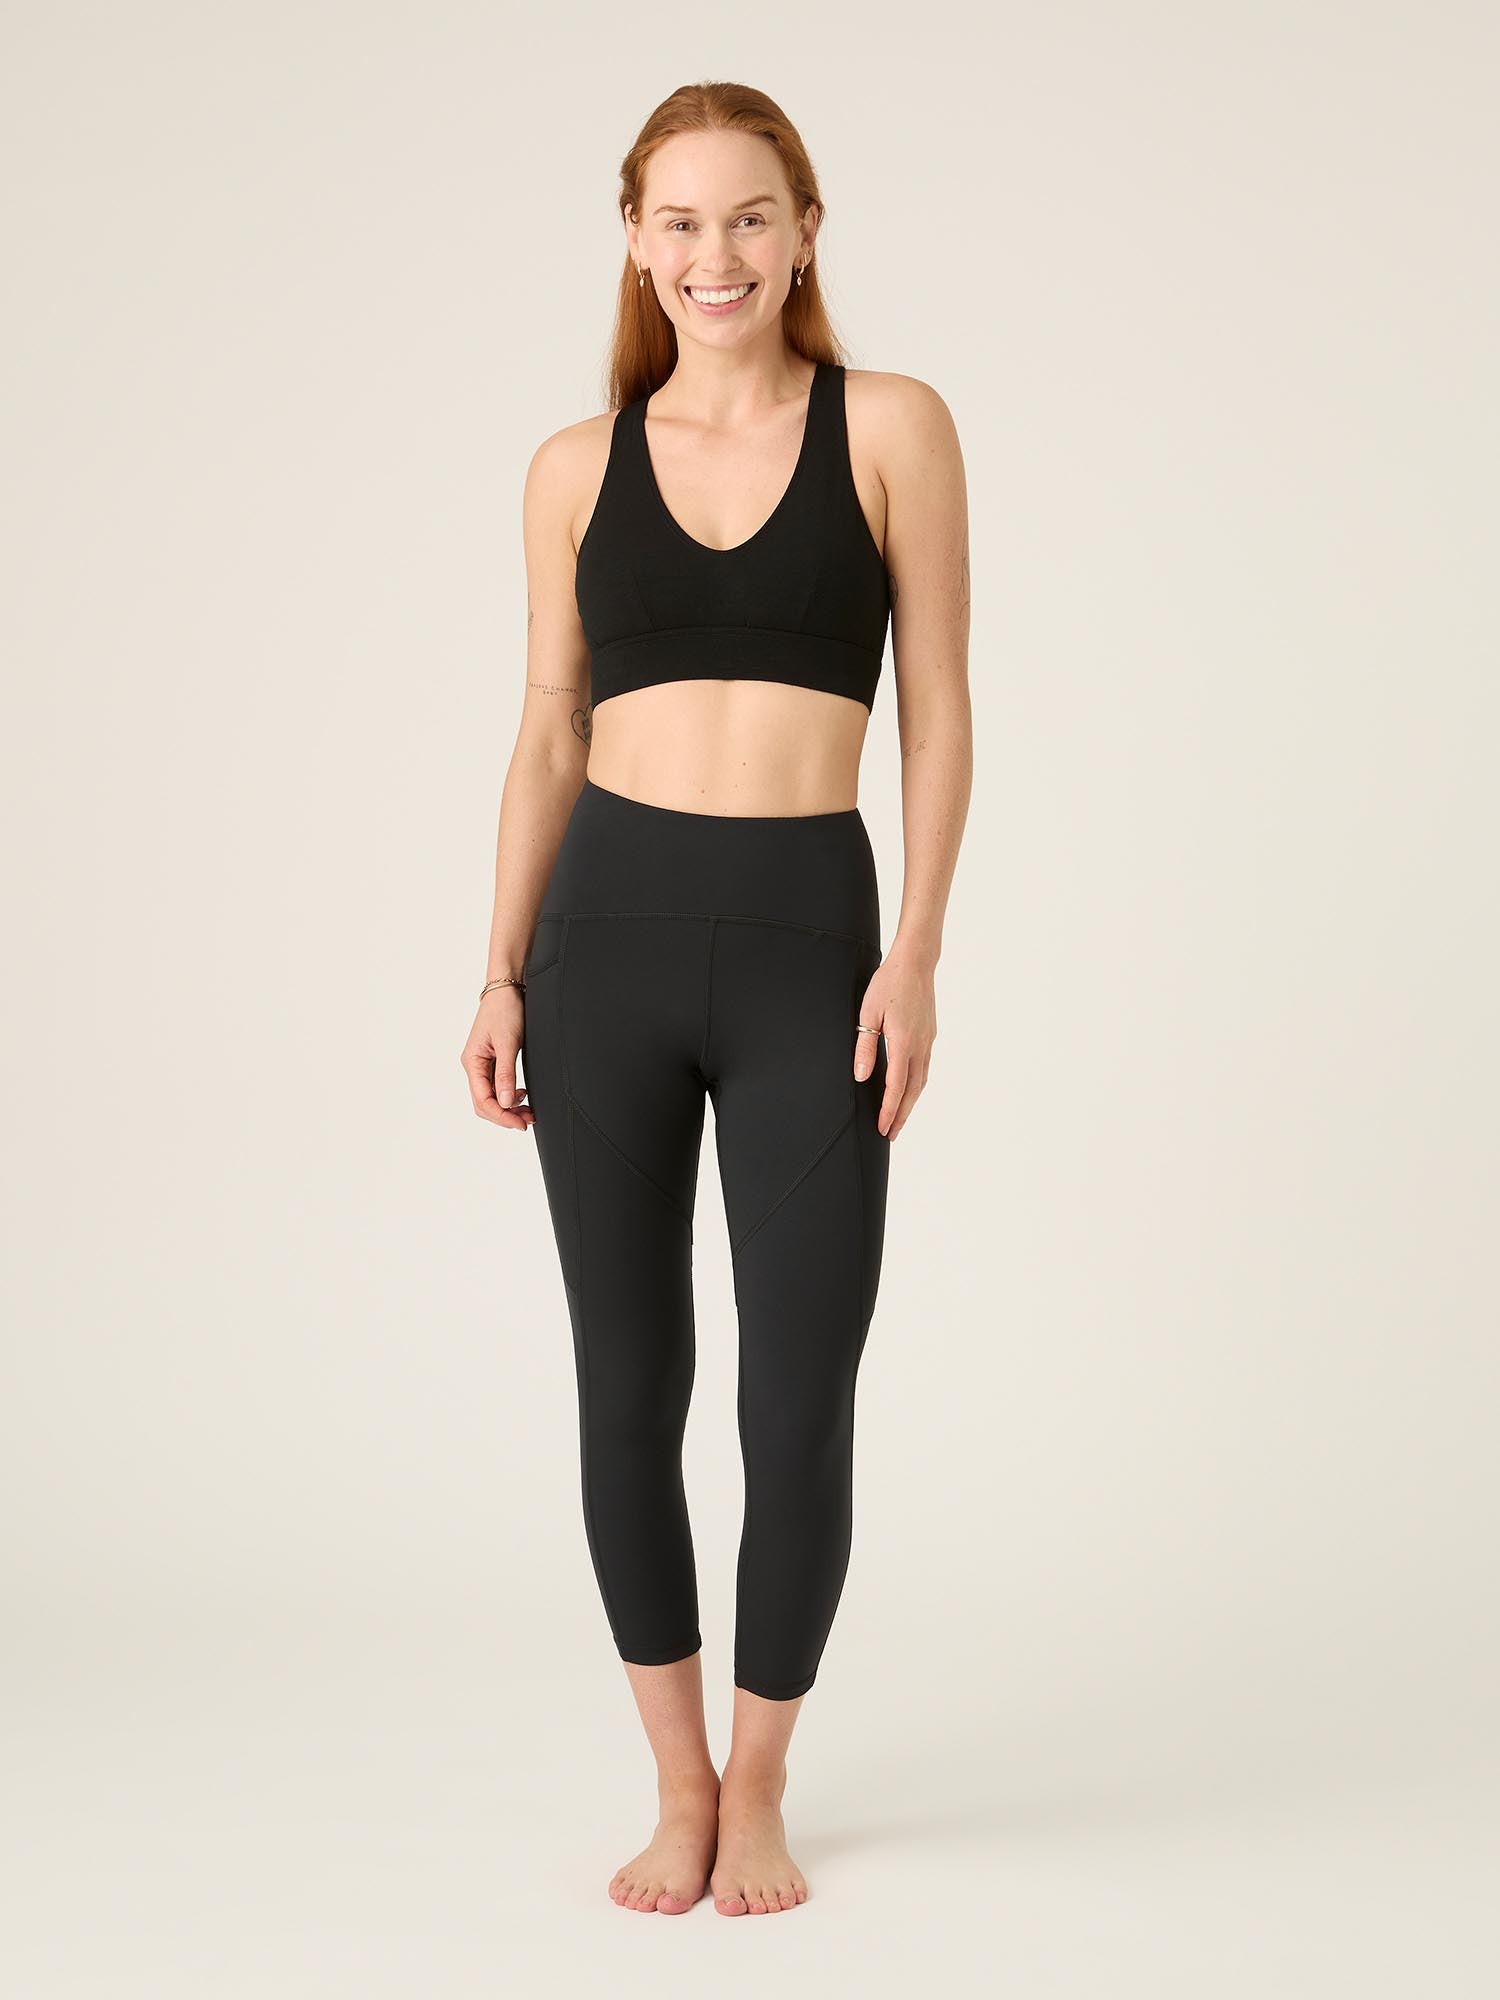 Brasini Fit High Waisted Leggings for Comfortable and Stylish Workouts